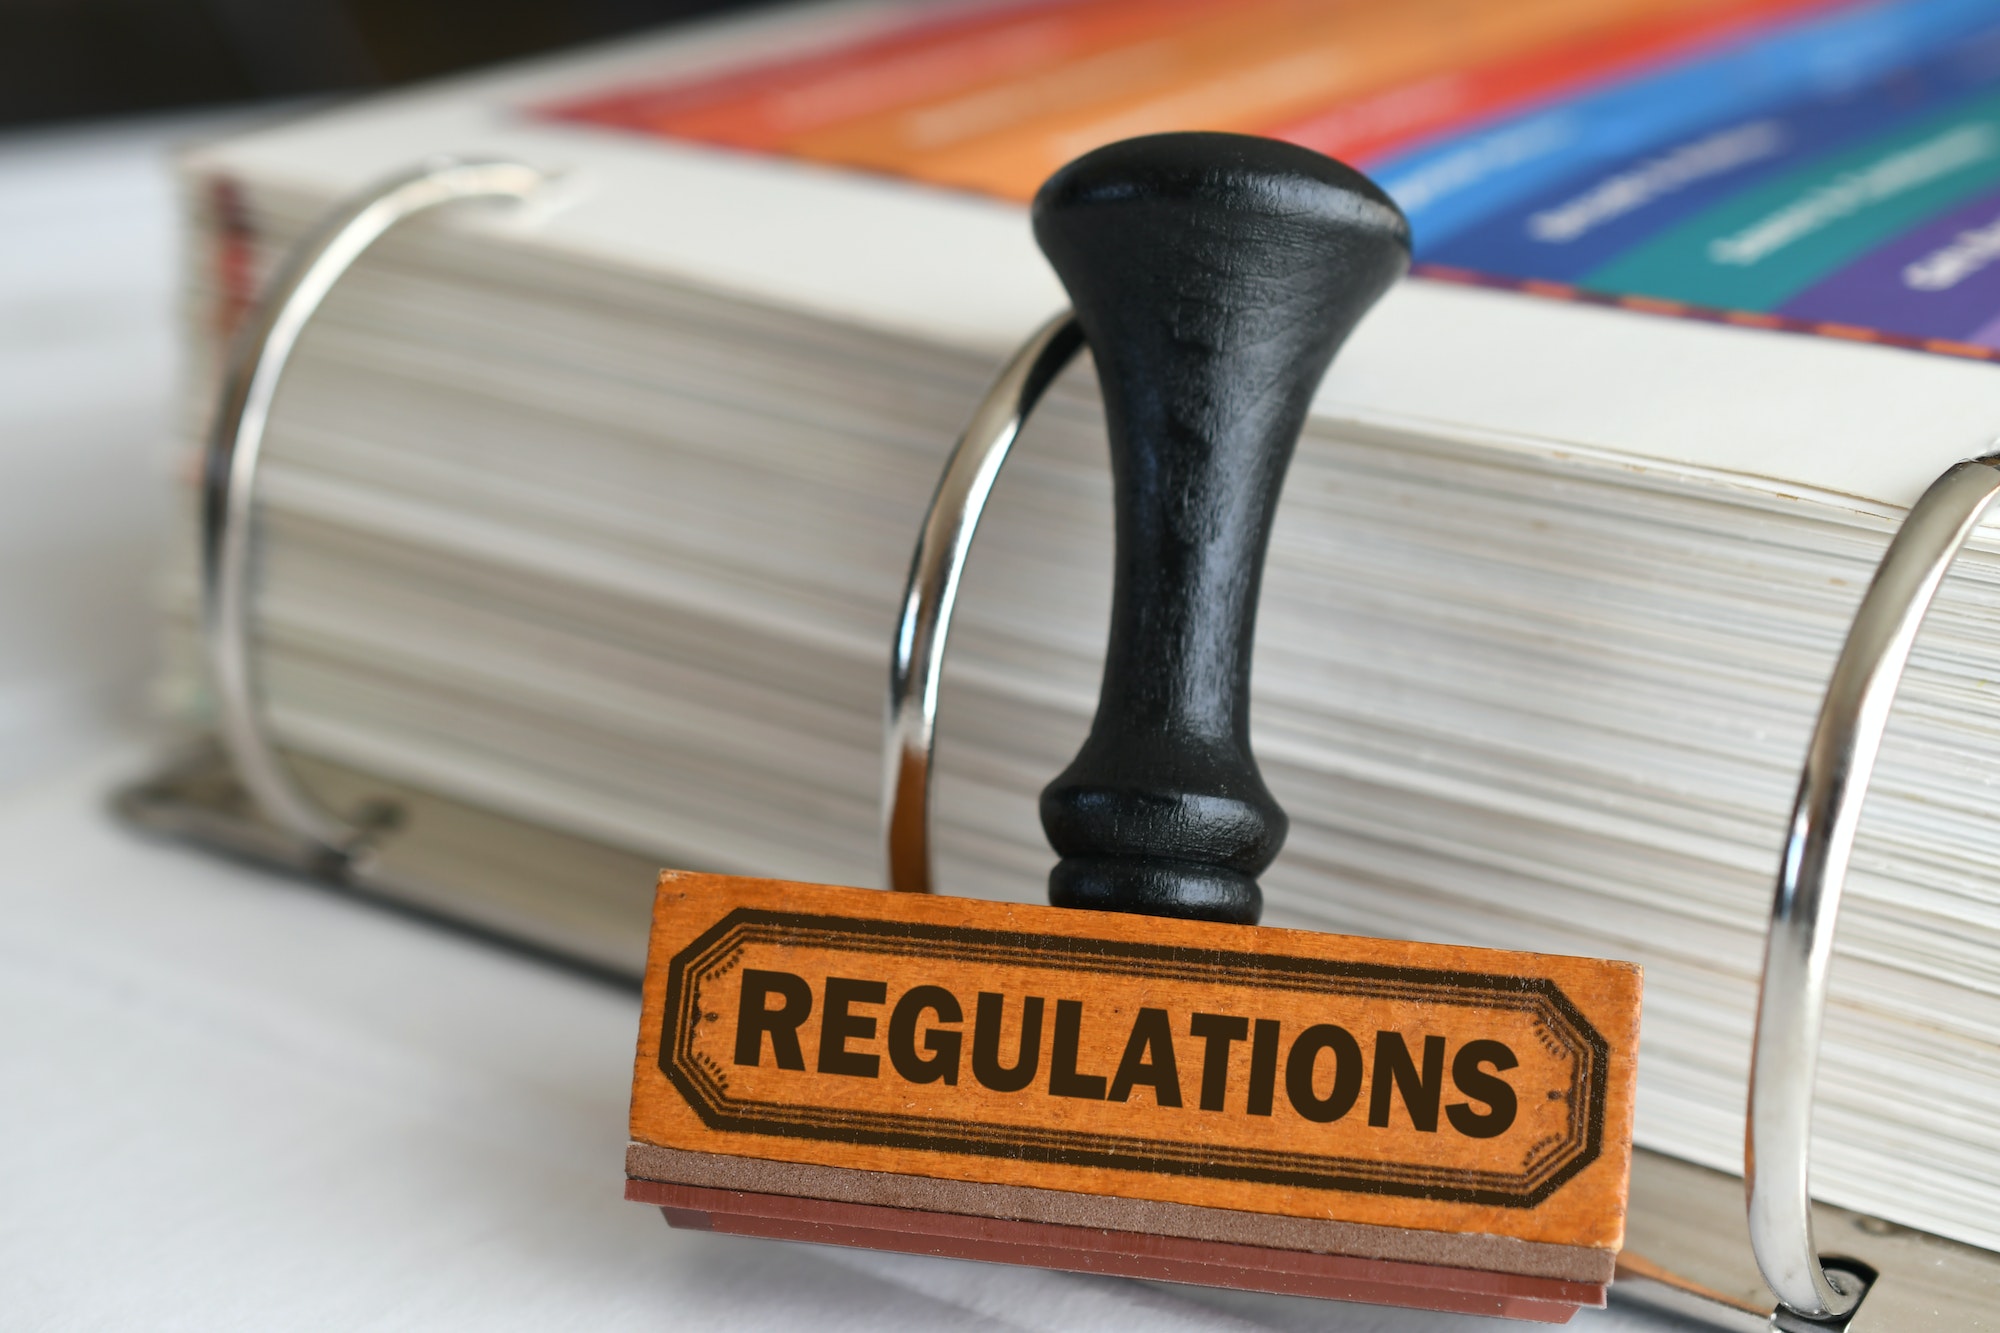 Regulations rubber stamp next to handbook of rules, compliance concept